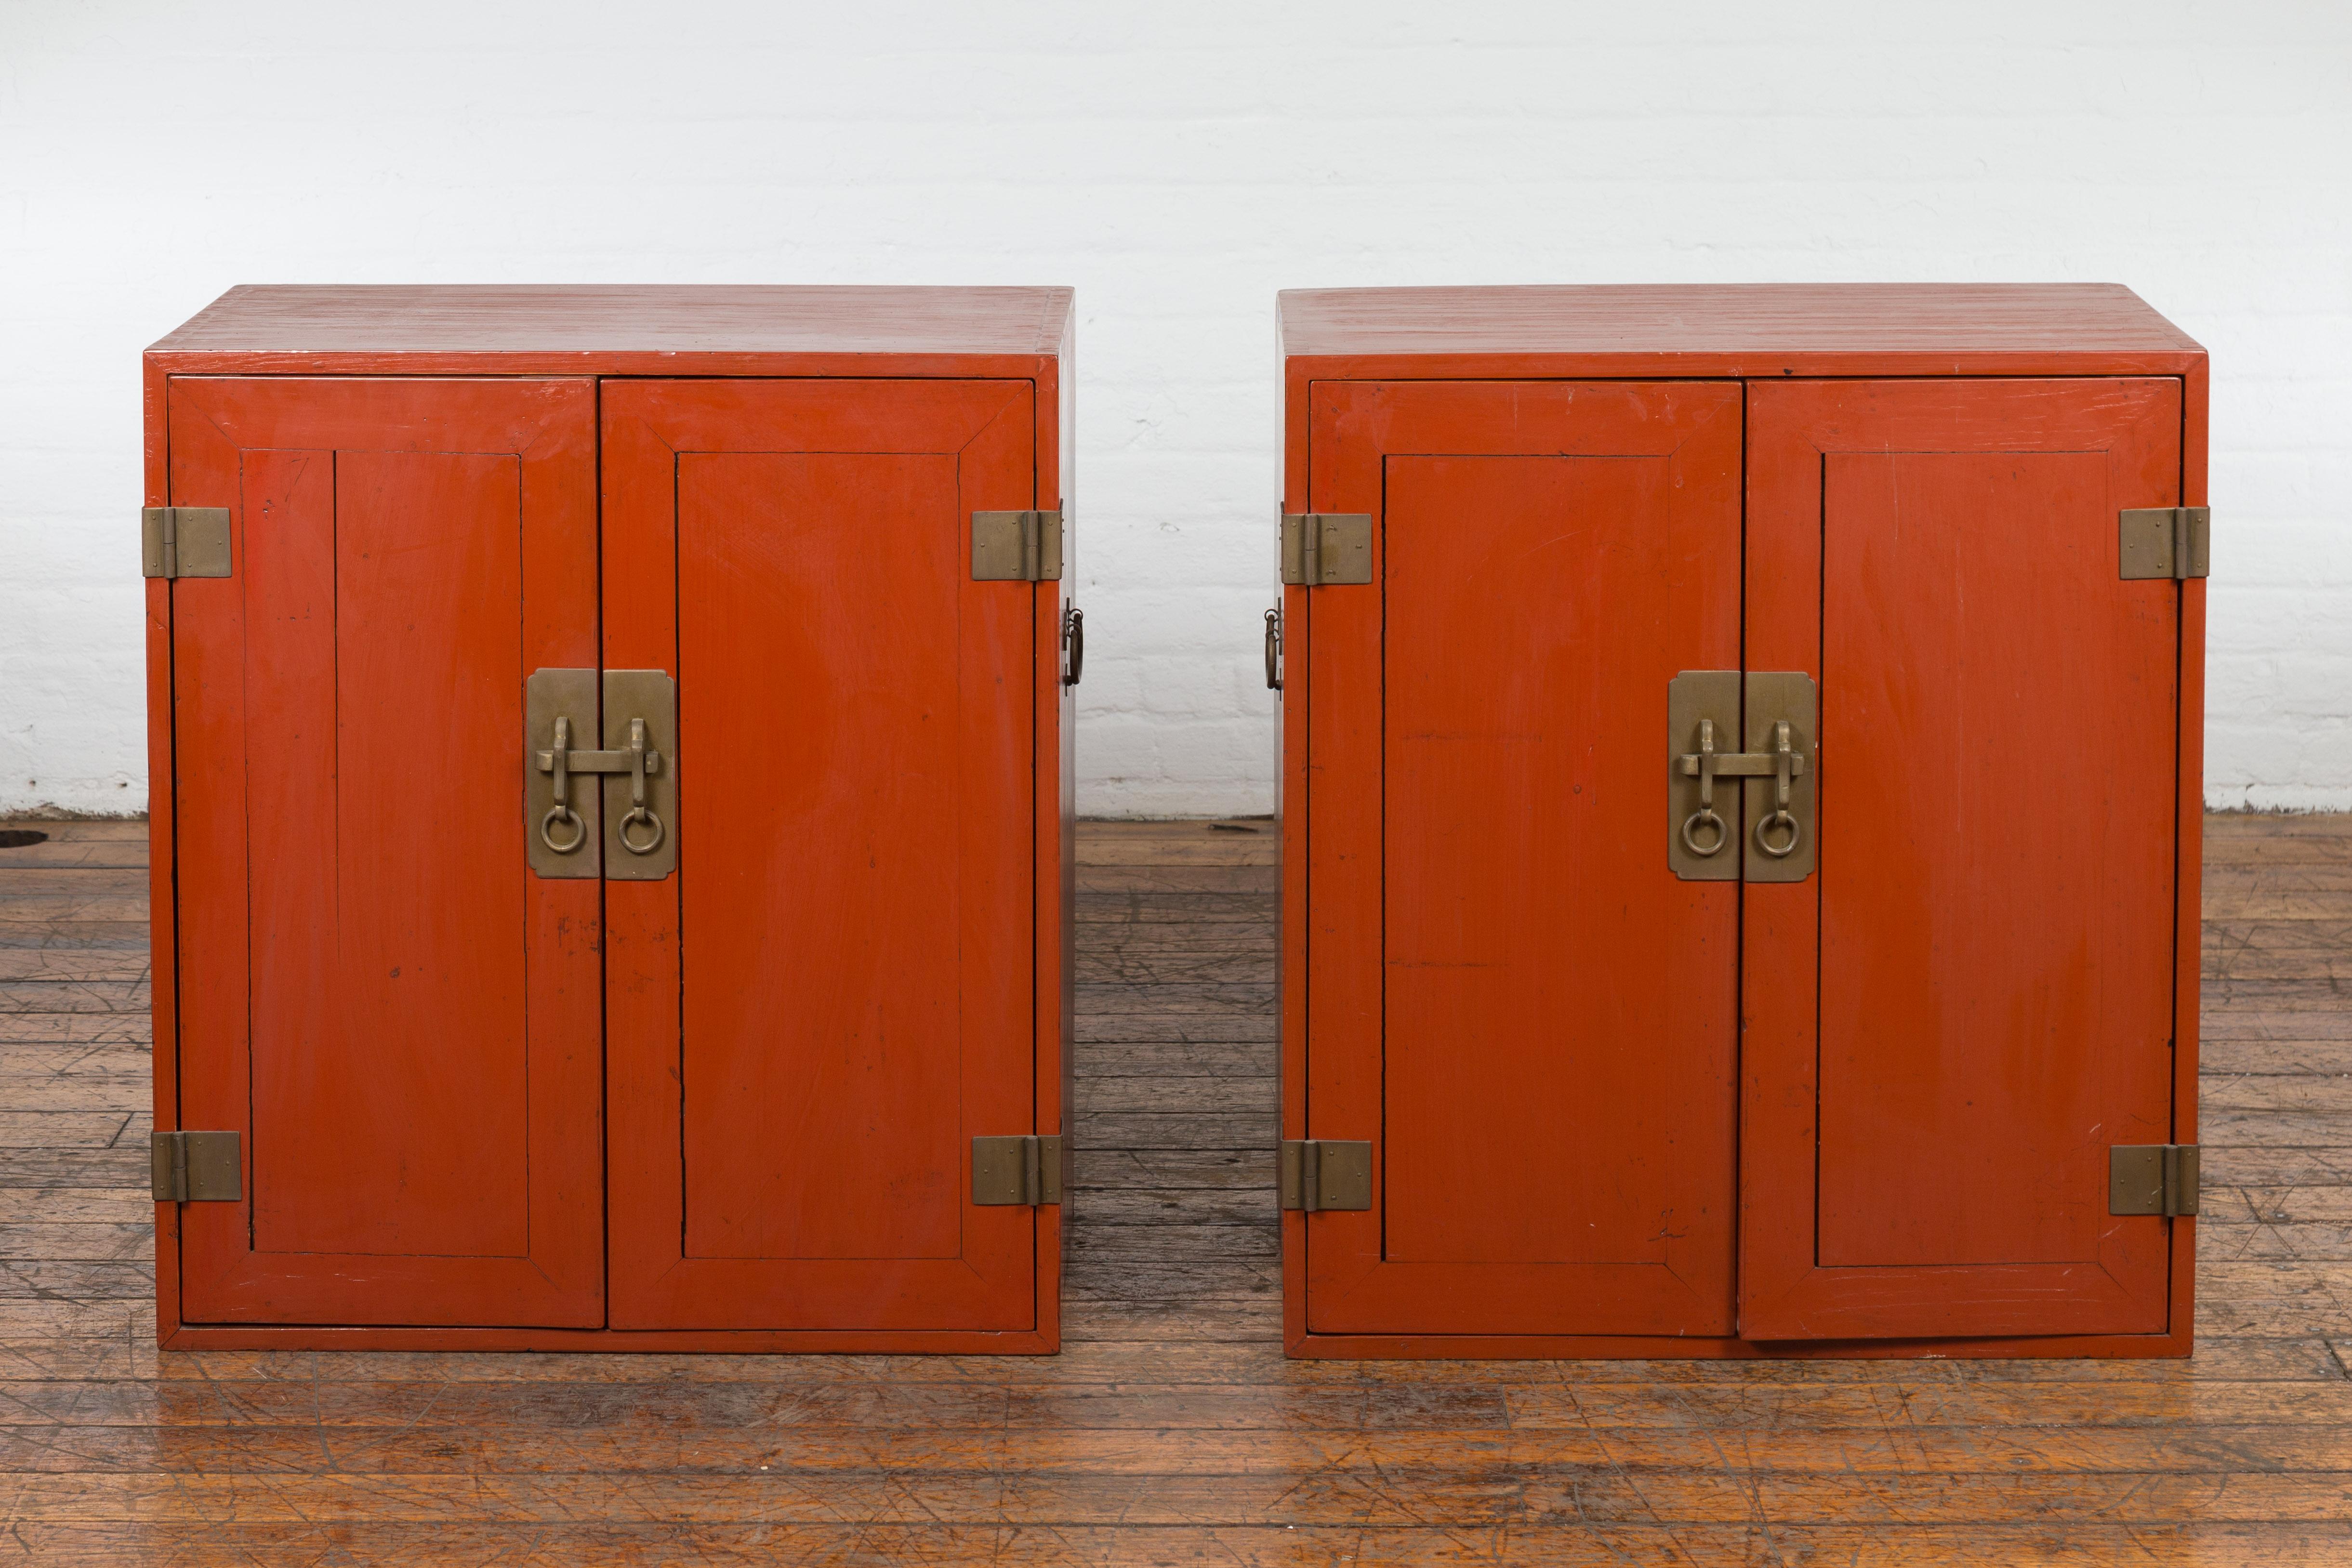 A pair of vintage Chinese side cabinets from the Mid-20th Century, with red lacquer finish, pairs of double doors, four interior boxes each and traditional brass hardware. Created in China during the mid 20th century, this pair of side cabinets